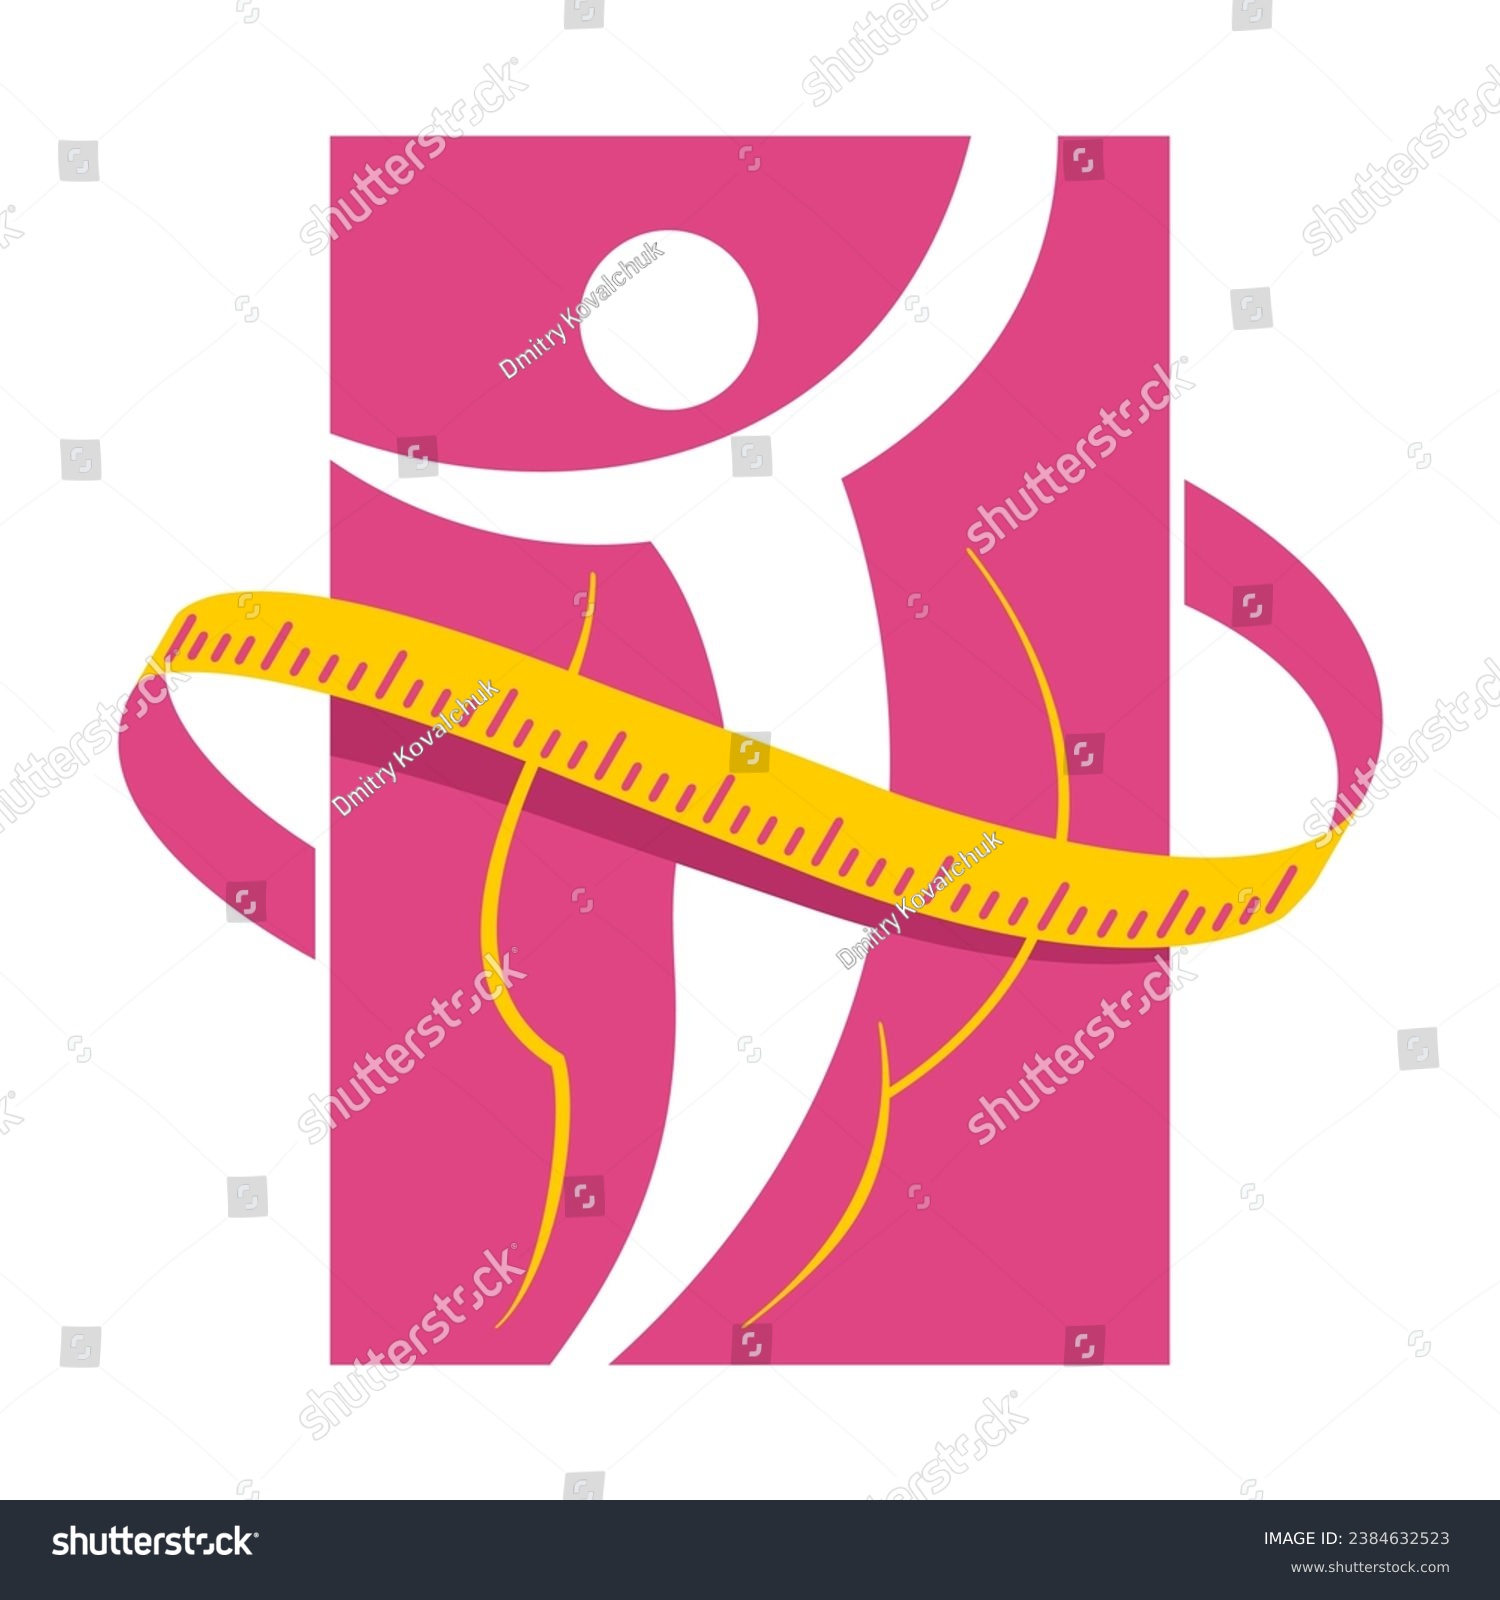 SVG of Weight loss challenge diet program emblem - abstract woman silhouette with measuring tape around svg